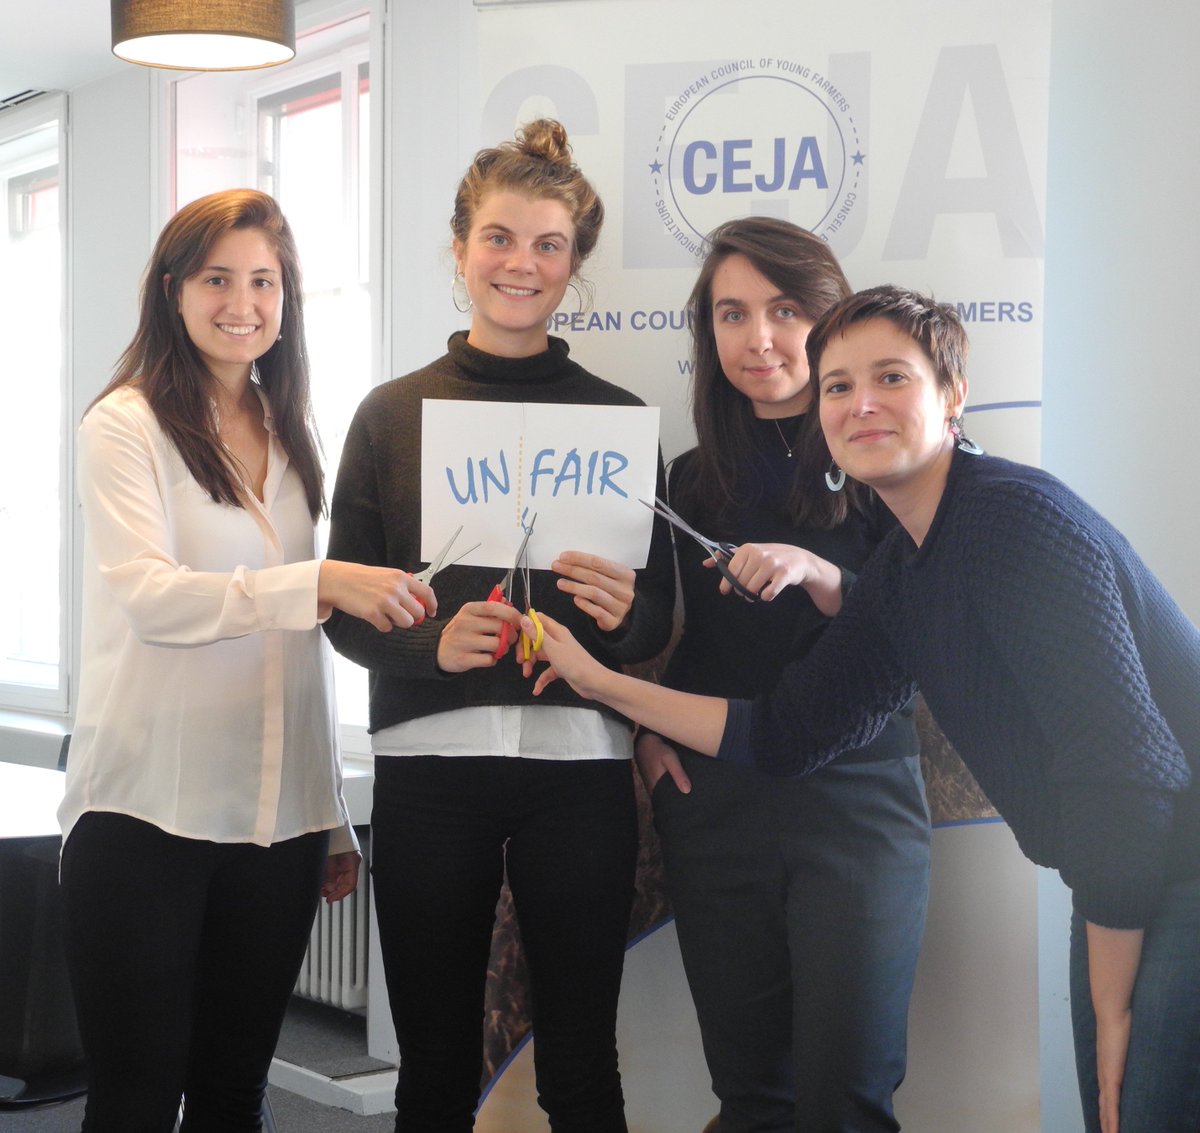 Our #youngfarmers here at CEJA are united behind the need for a #FairFoodChain 🌽 We call on MEPs  #CutTheUnfair practices and adopt a final position today 🗳️